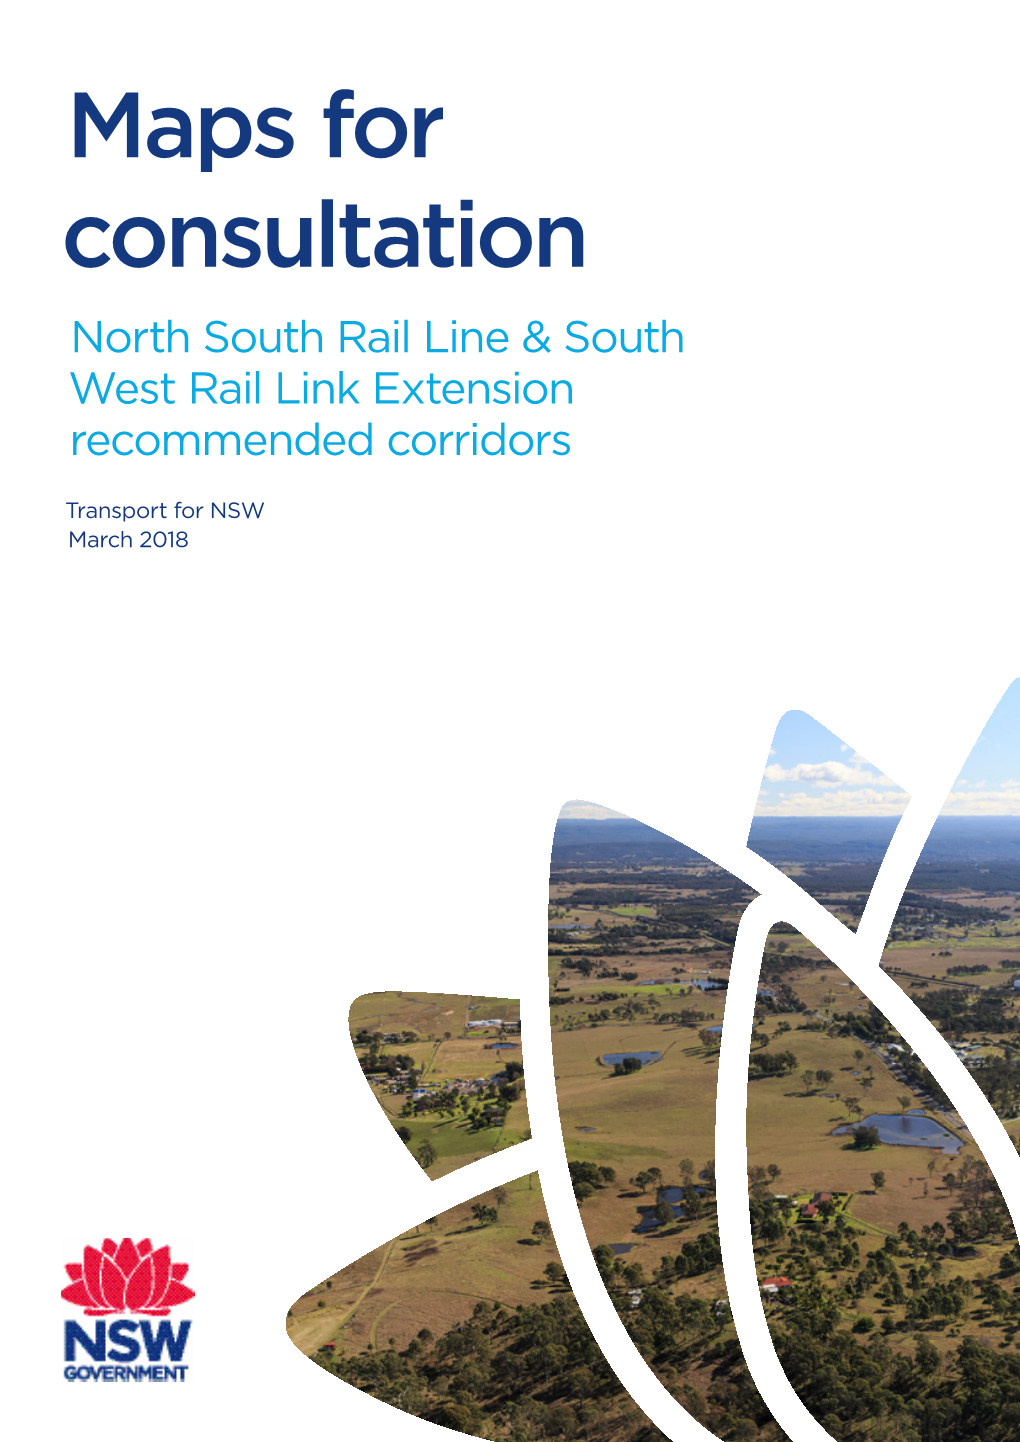 Maps for Consultation: North South Rail Line & South West Rail Link